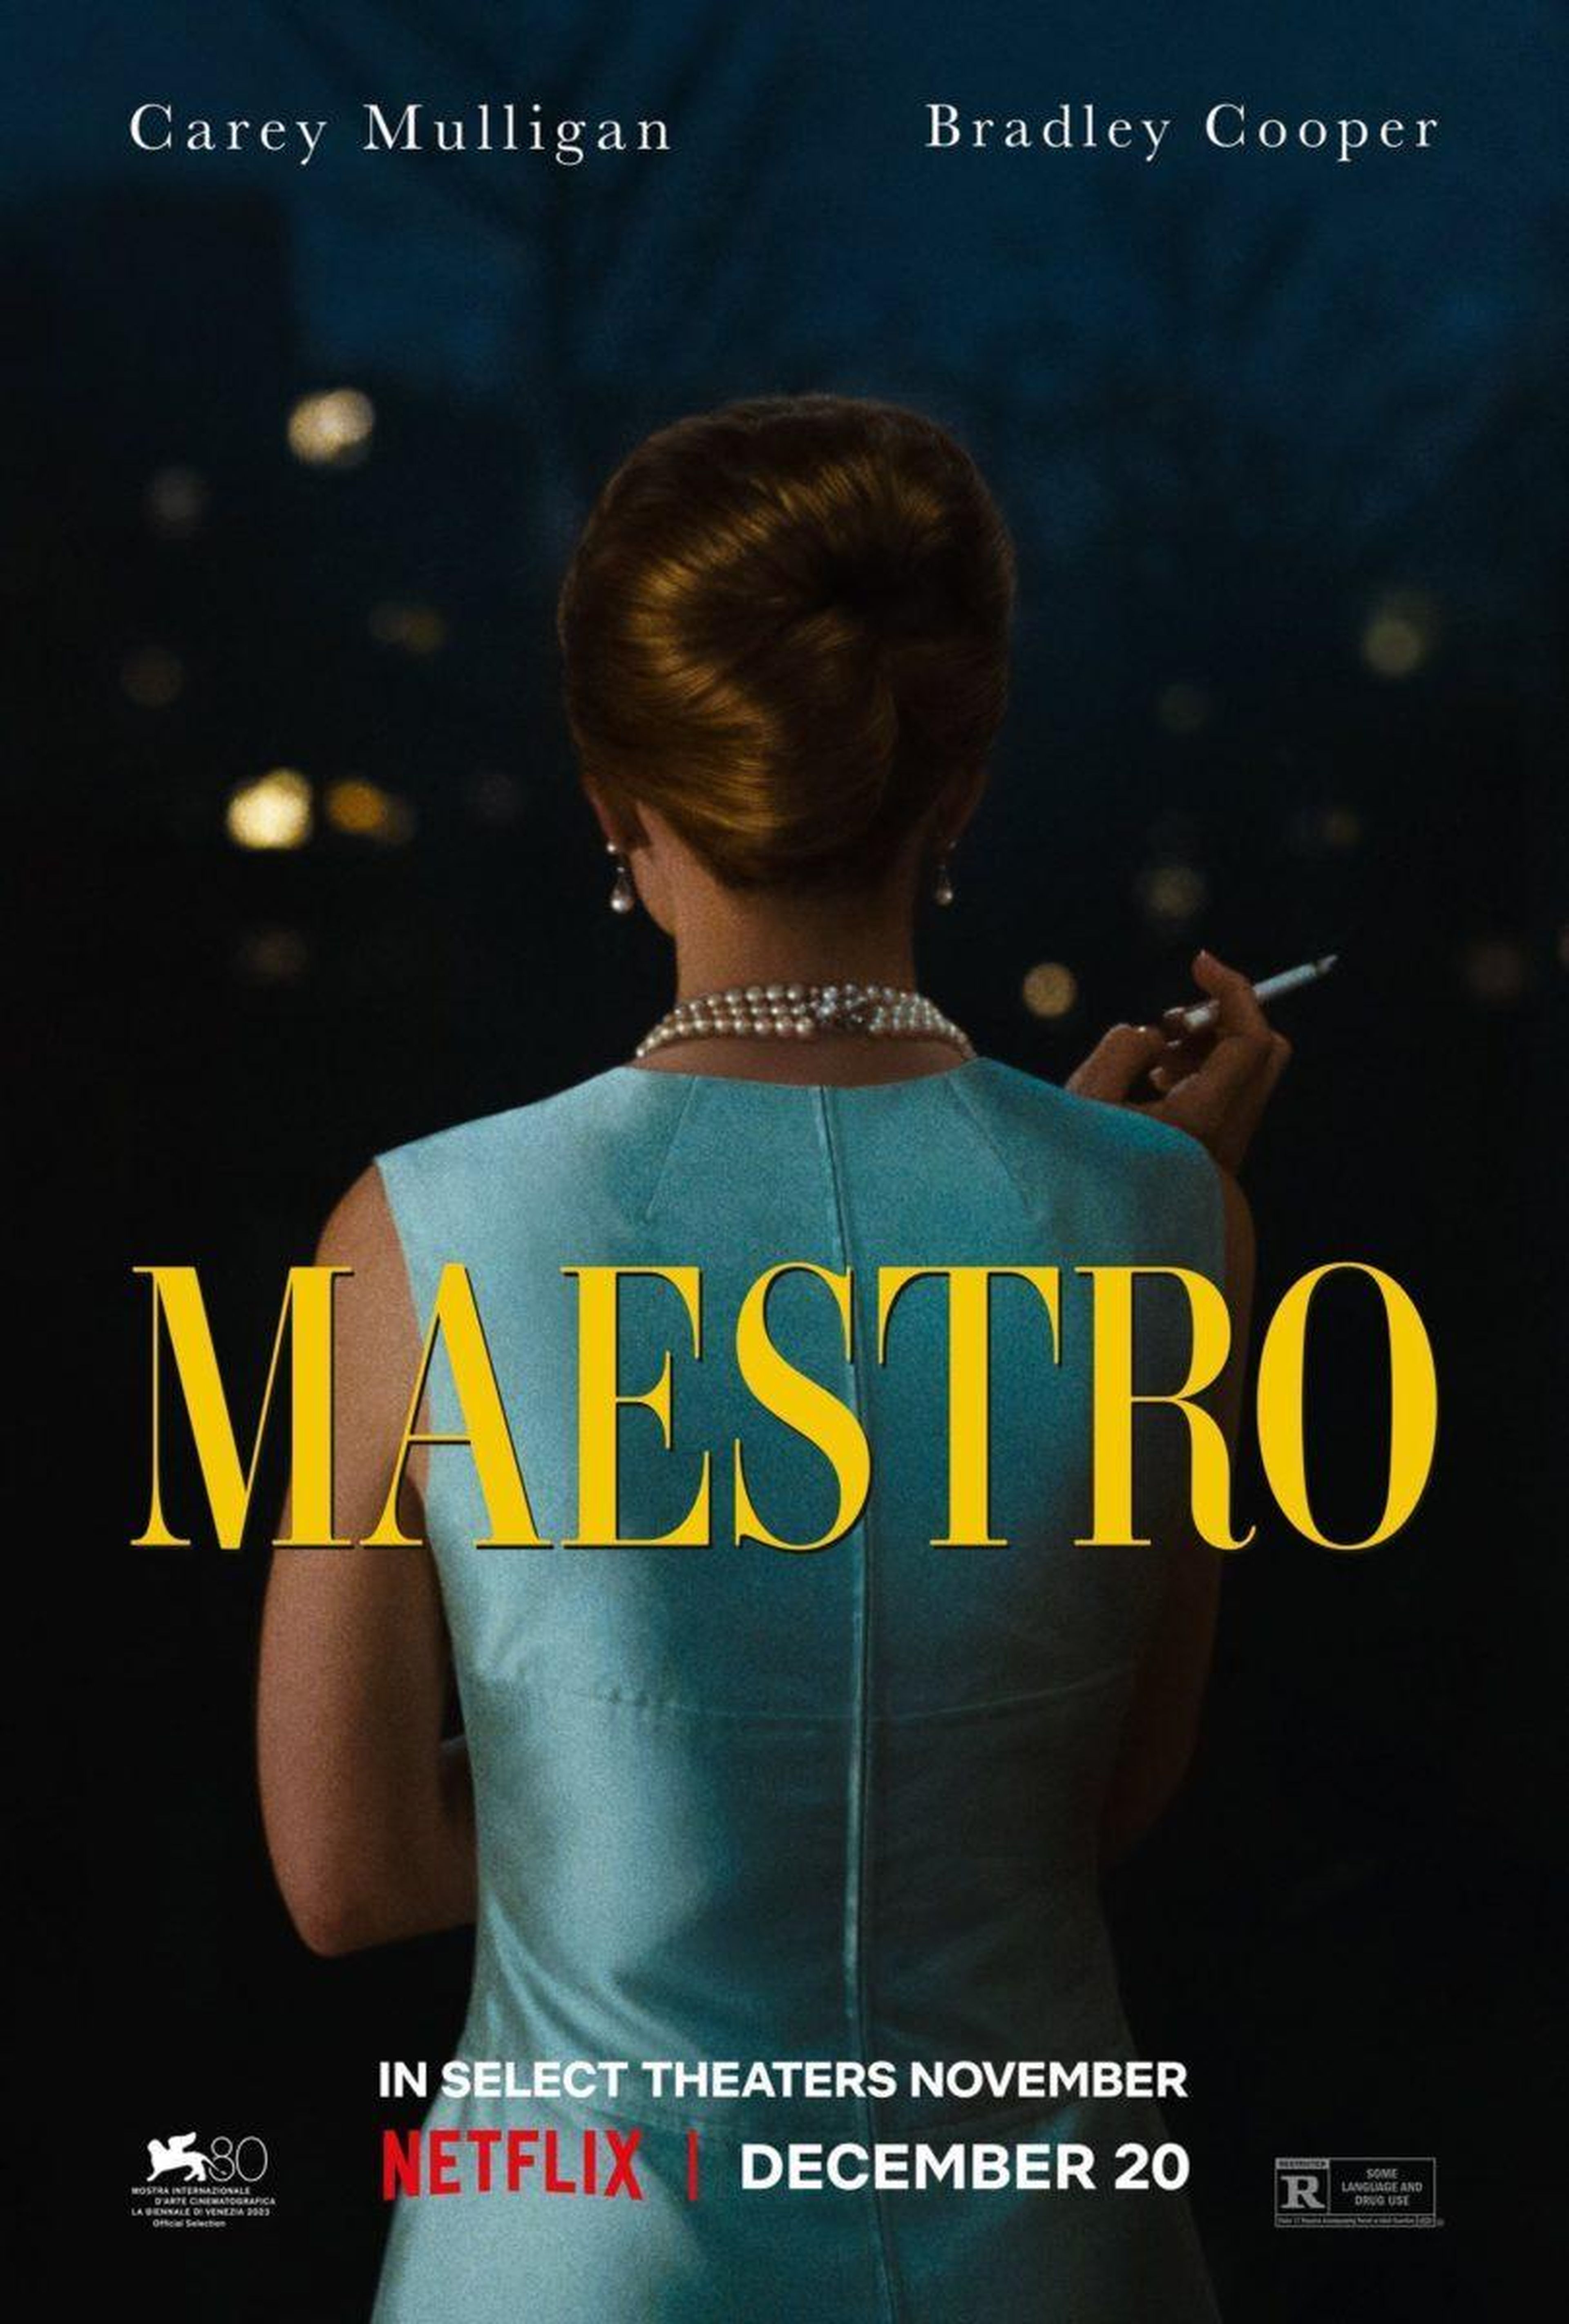 Trailer for Maestro, Bradley Cooper's new movie coming to Netflix in